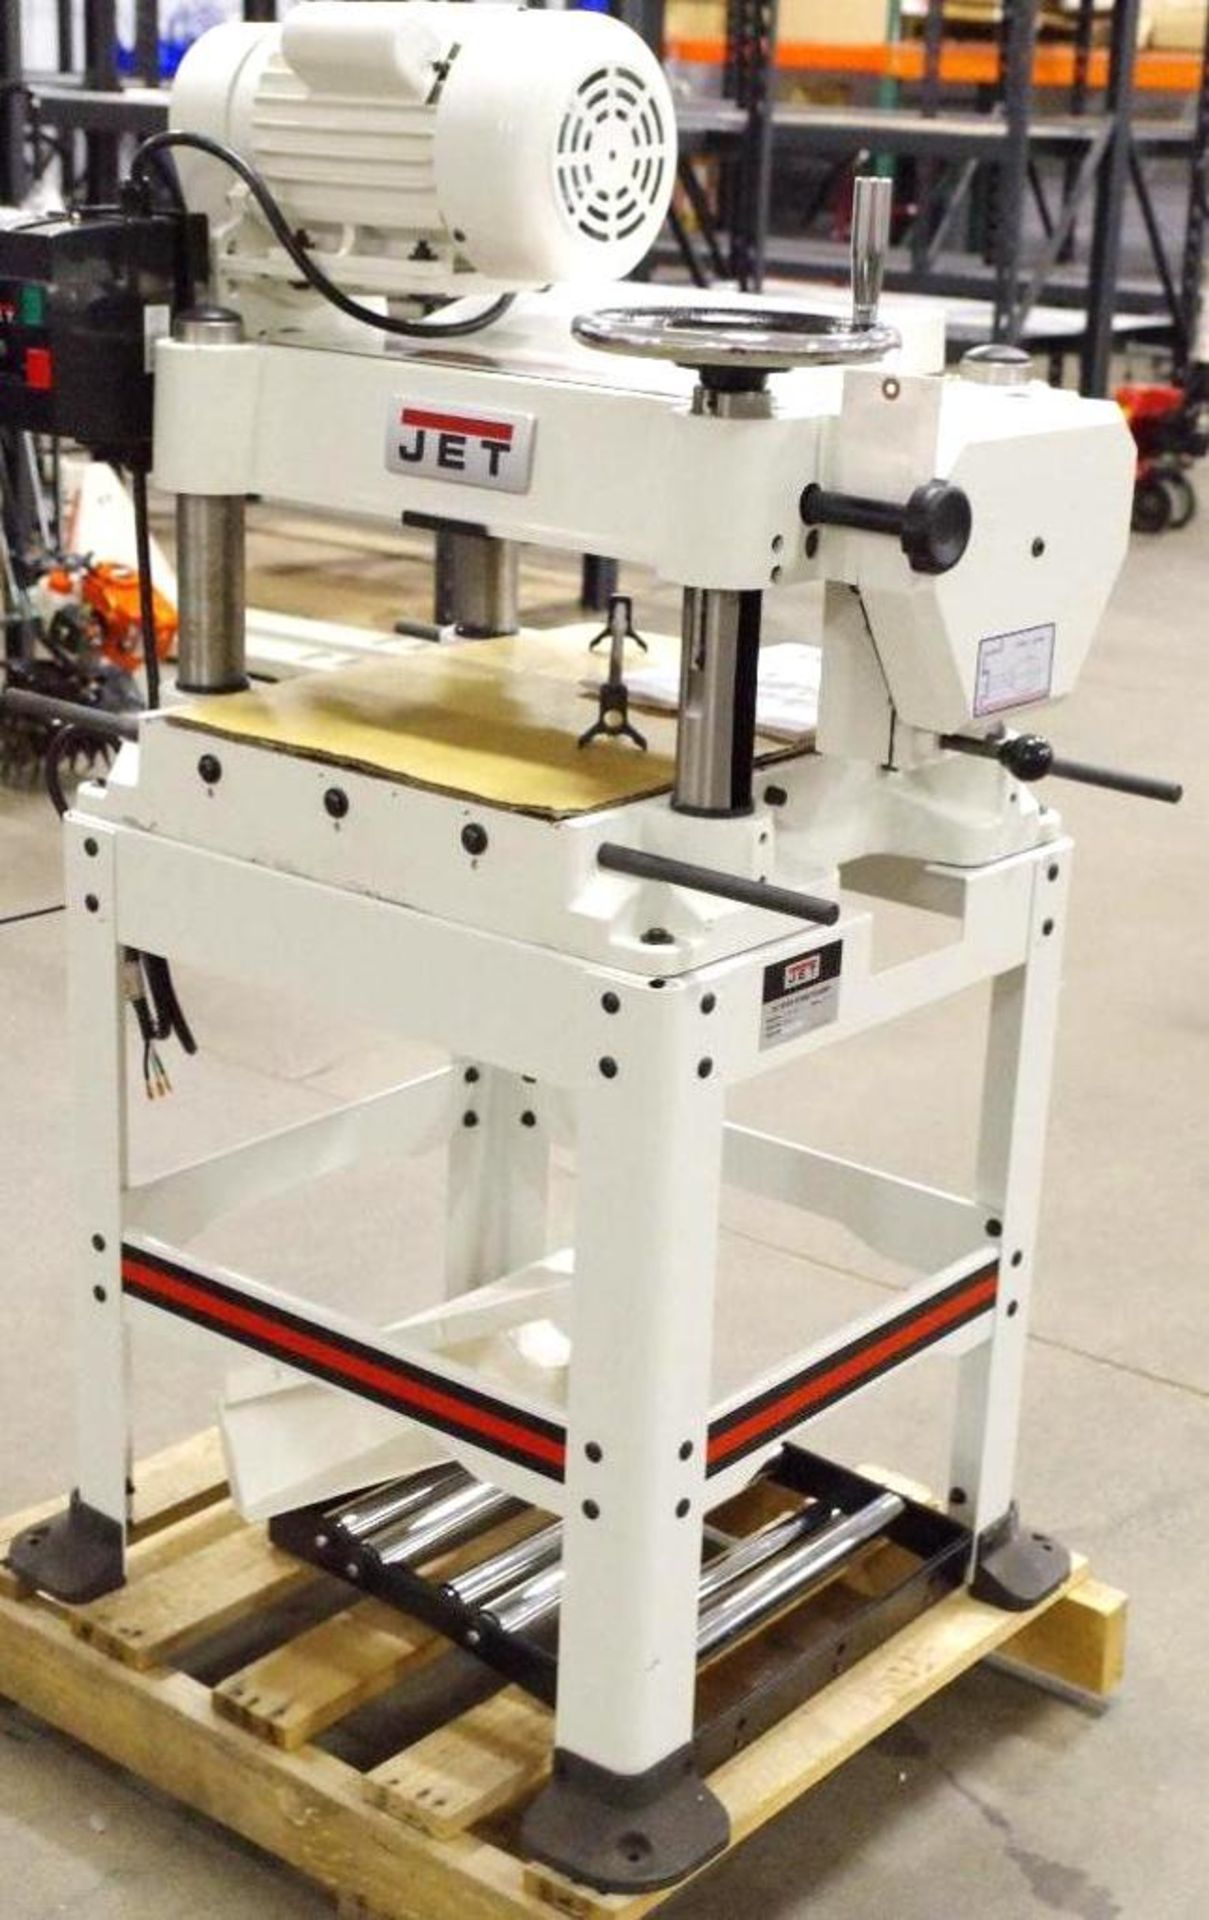 NEW JET 16" Open Stand Planer 3HP, 1PH, 230V, M/N JWP-16OS - Image 3 of 7